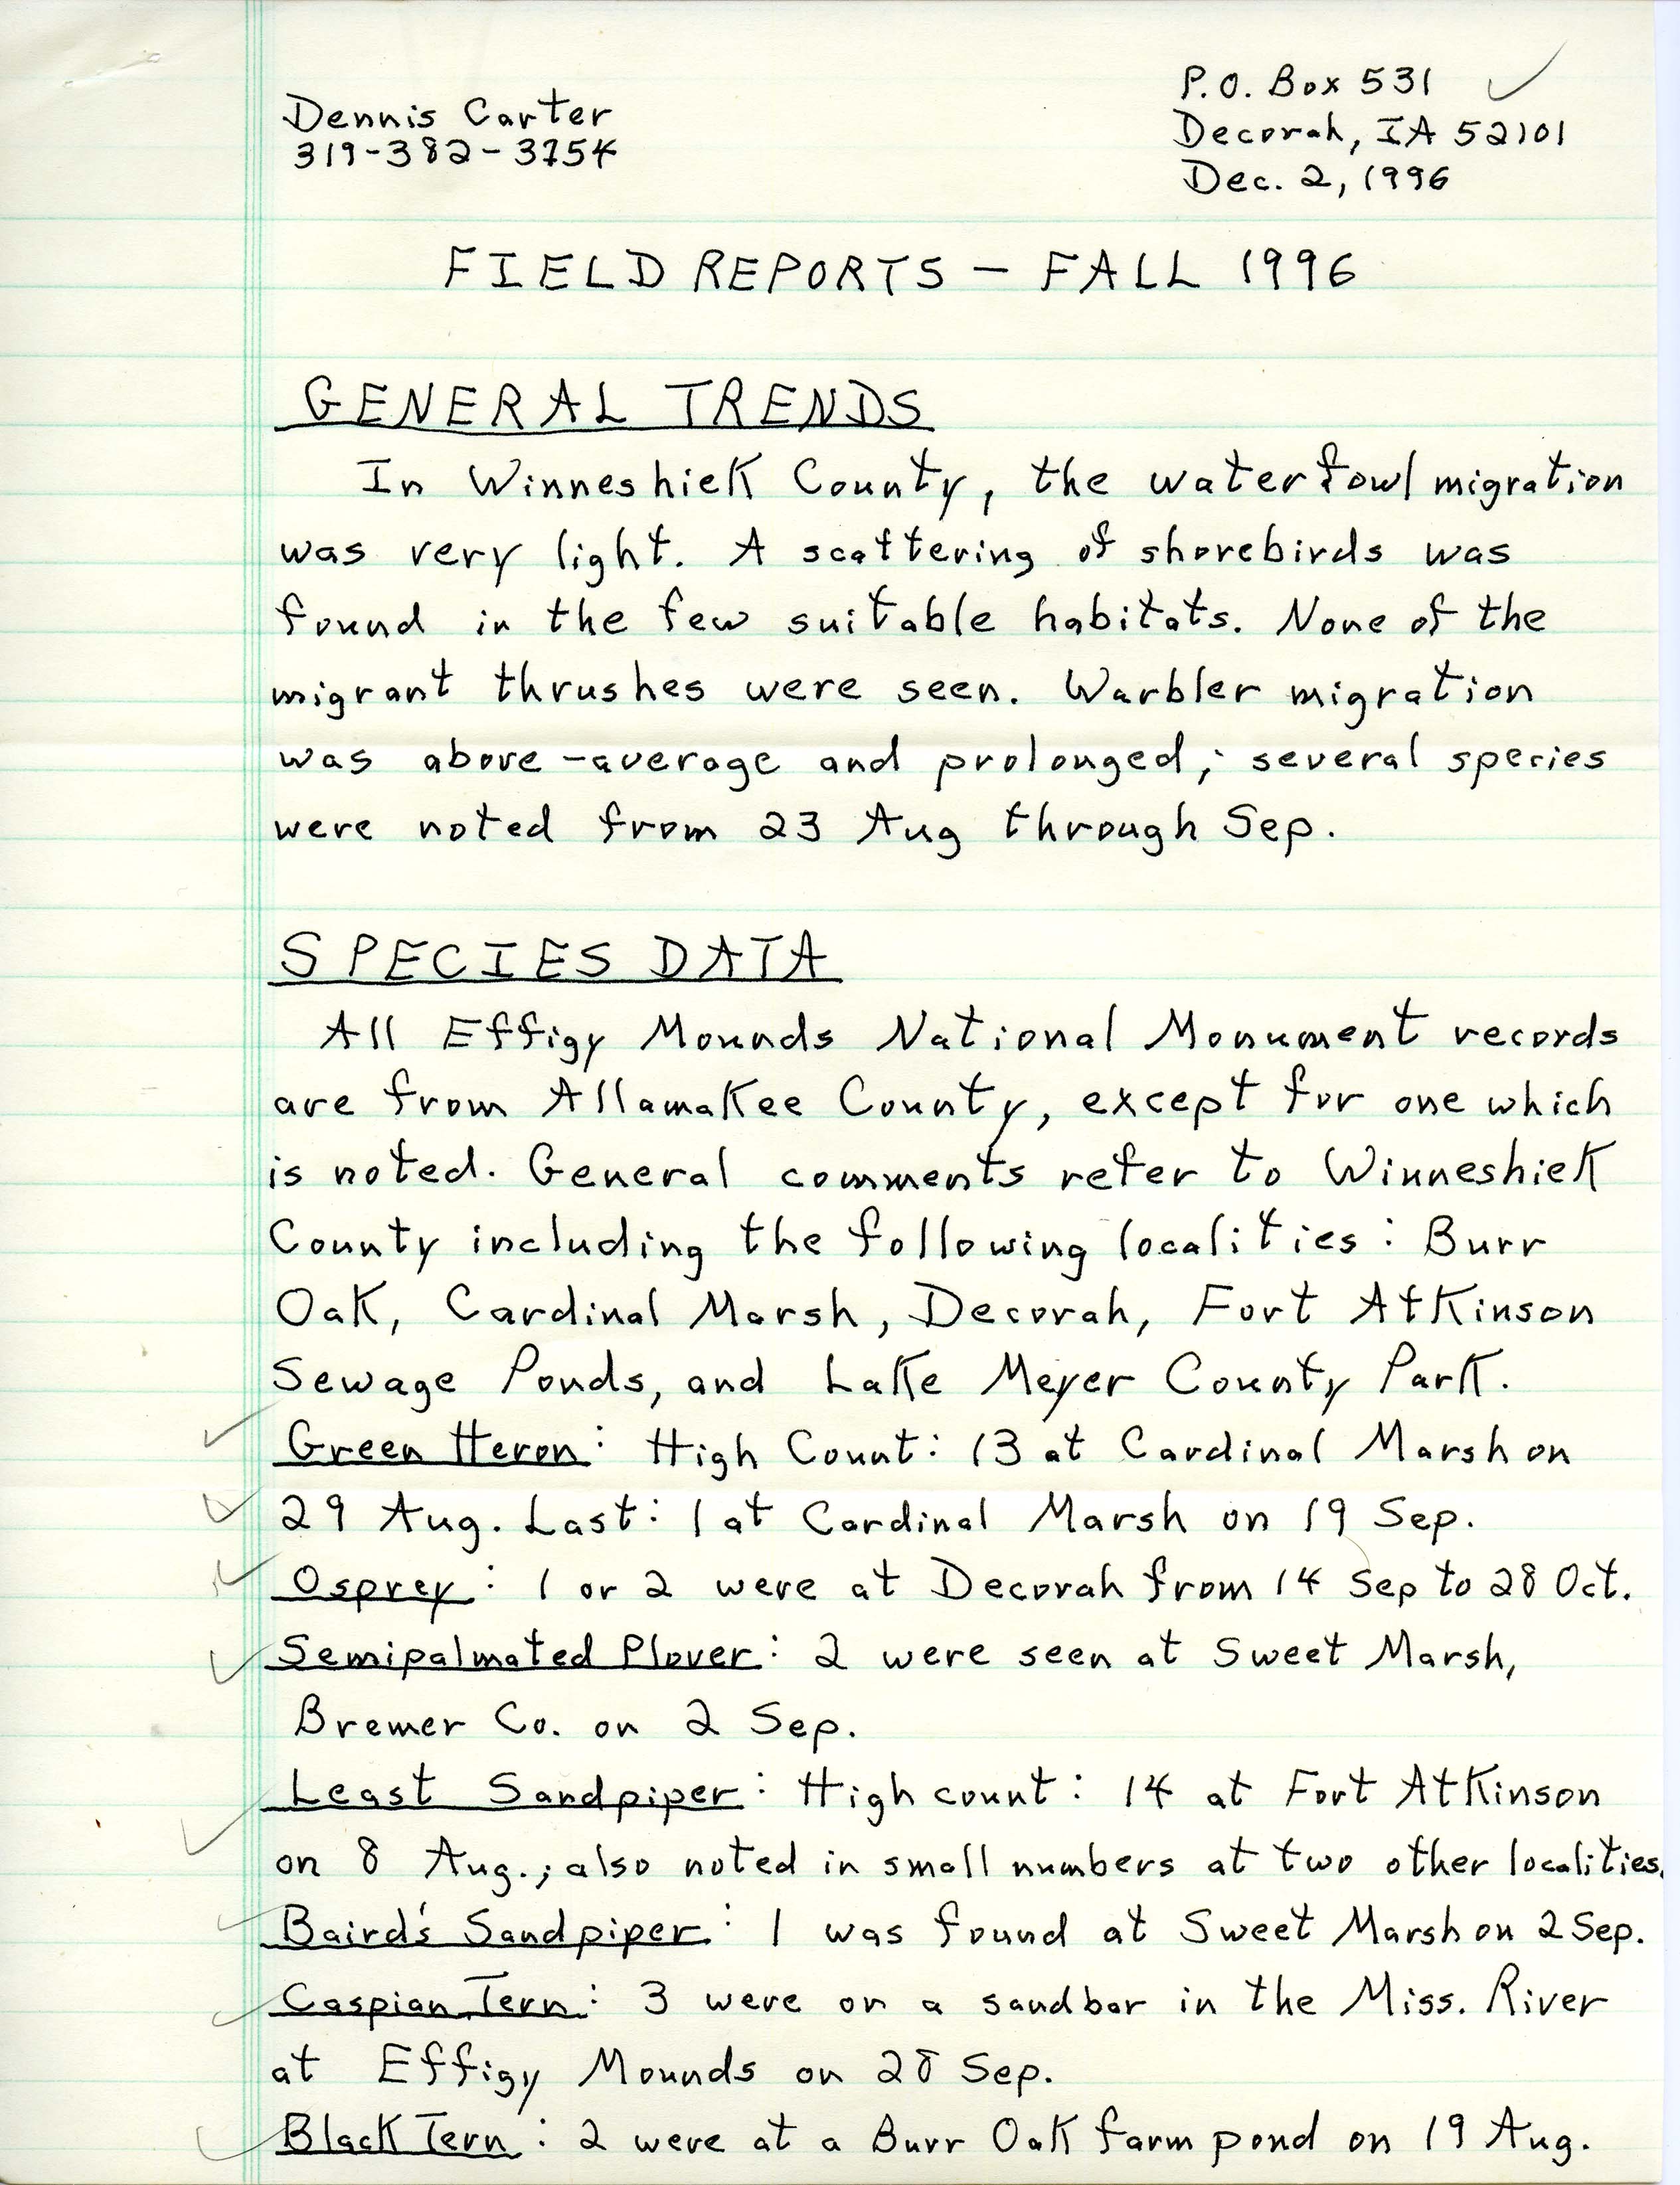 Field notes contributed by Dennis L. Carter, December 2, 1996